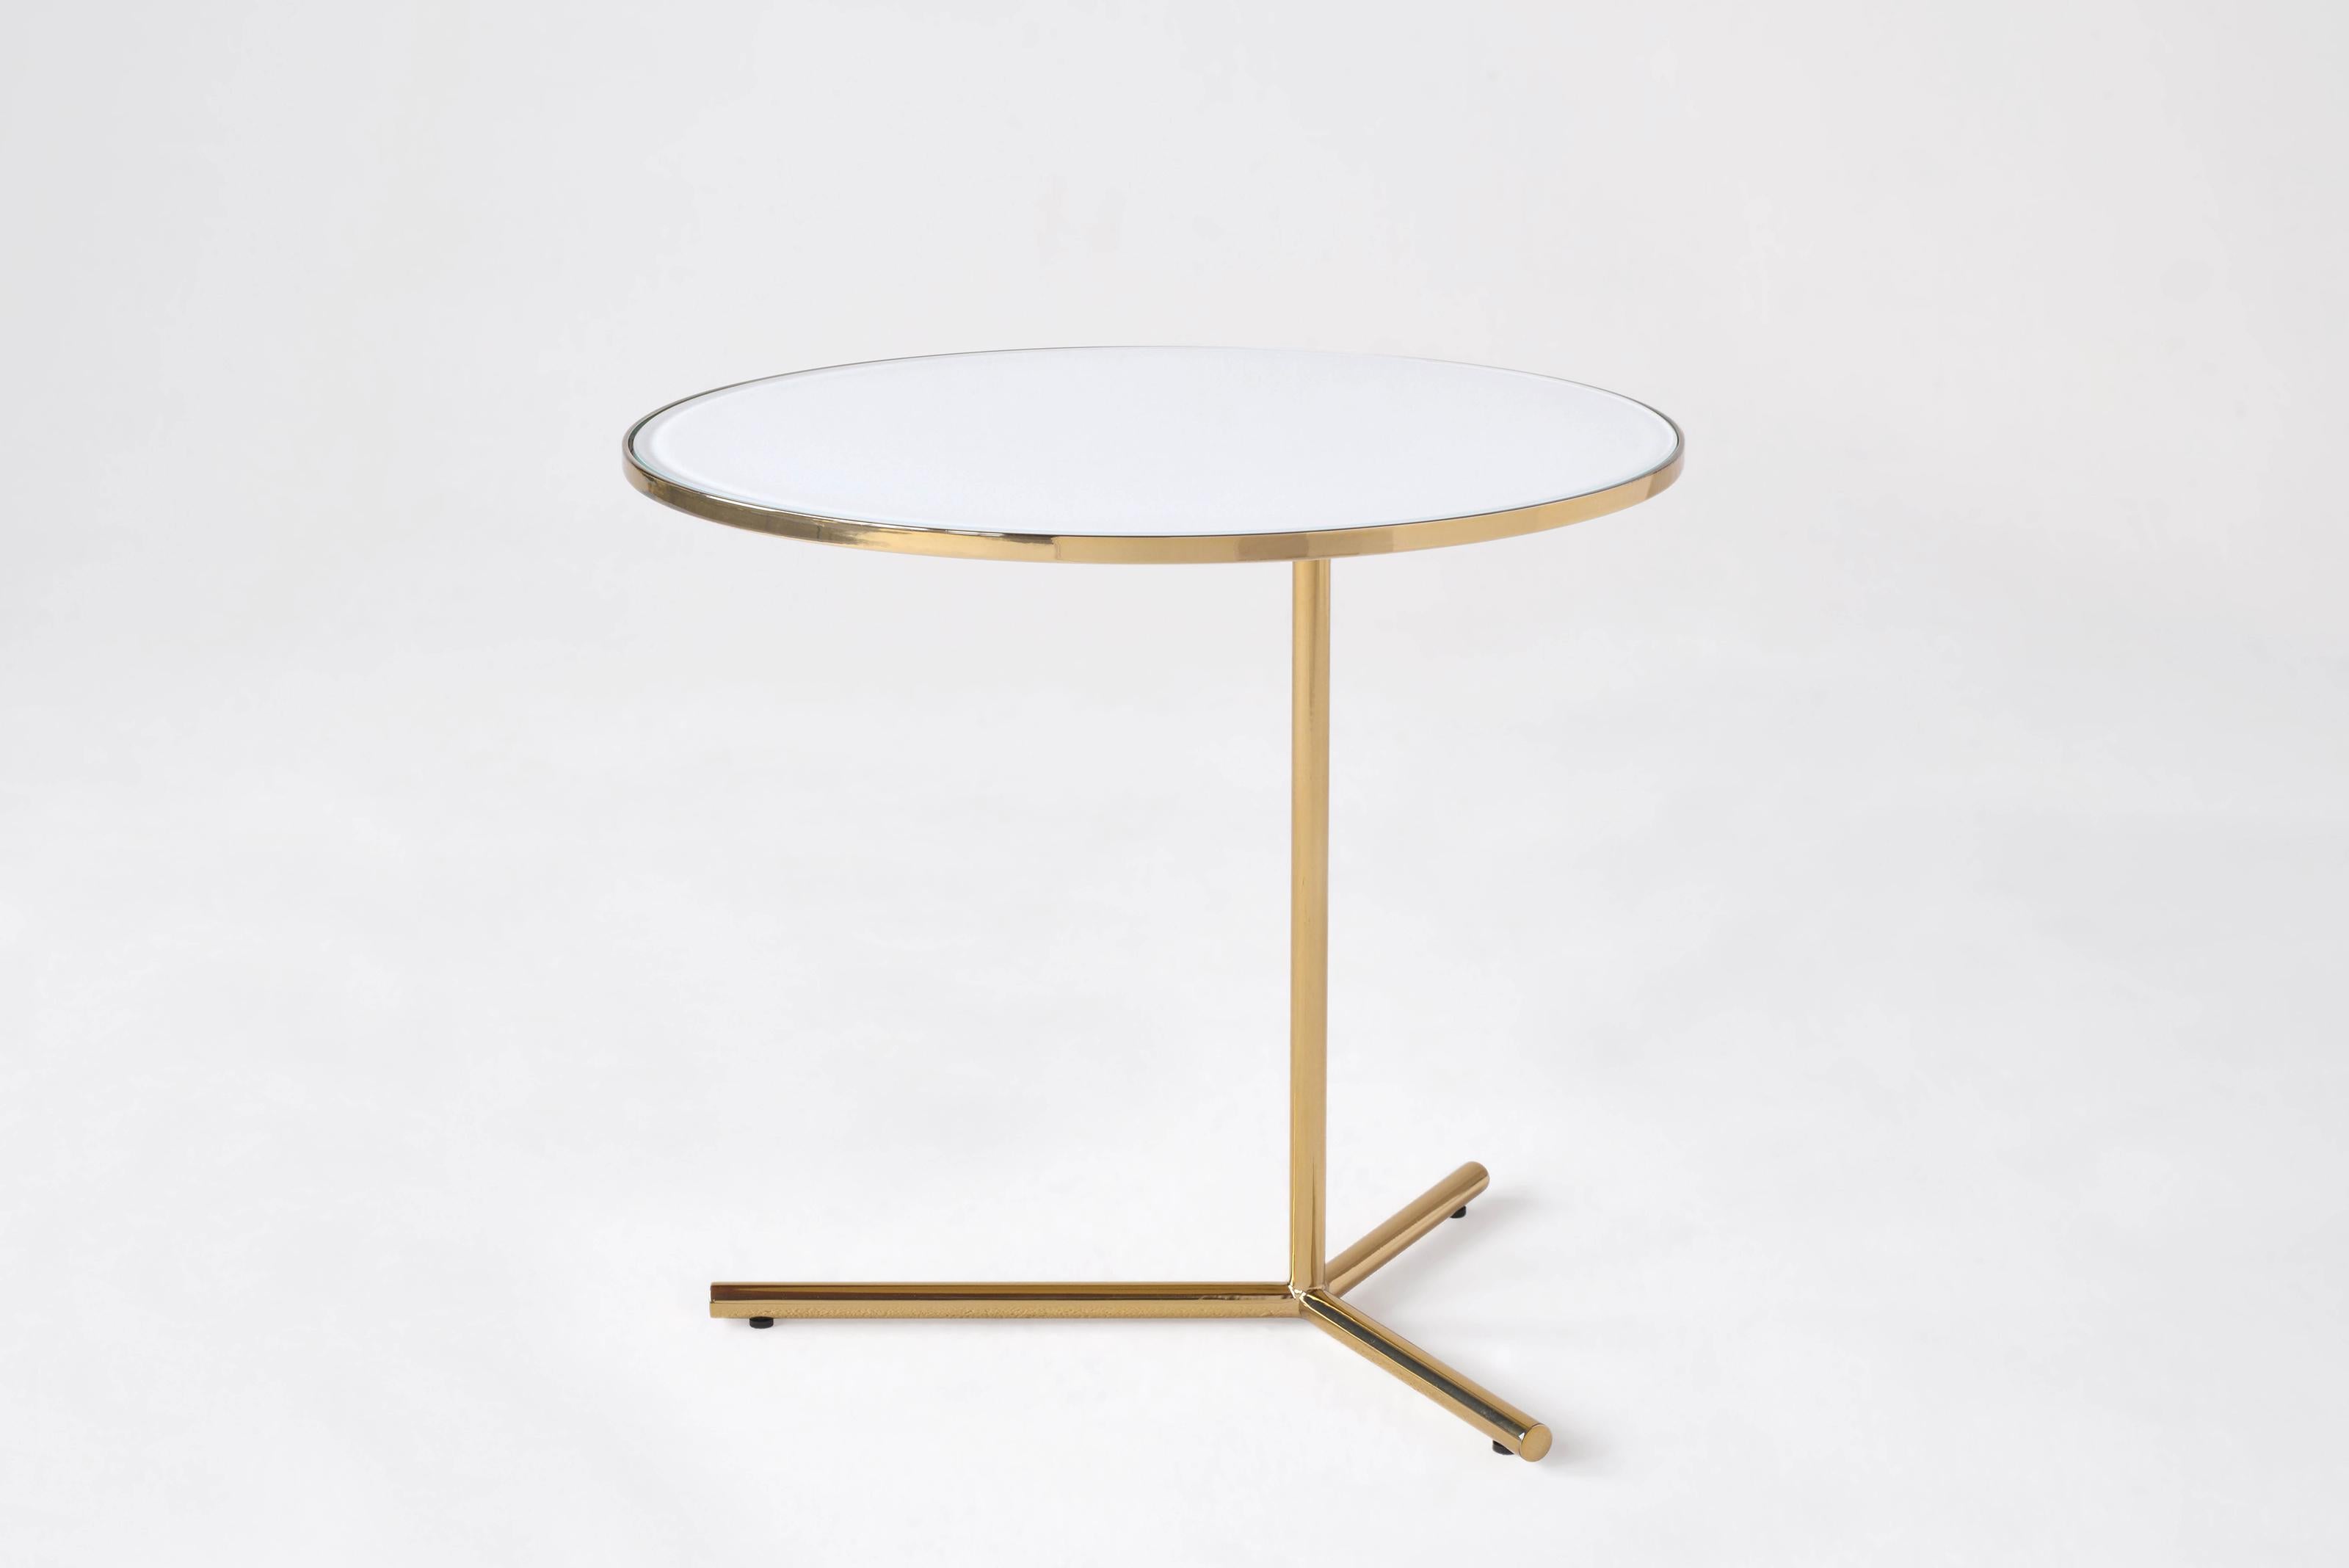 Downtown Medium Table by Phase Design
Dimensions: Ø 50,8 x H 45,7 cm. 
Materials: Spandrel glass, steel and polished brass.

Solid steel base available in flat or gloss black and white powder coat, polished chrome, burnt copper, or smoked brass